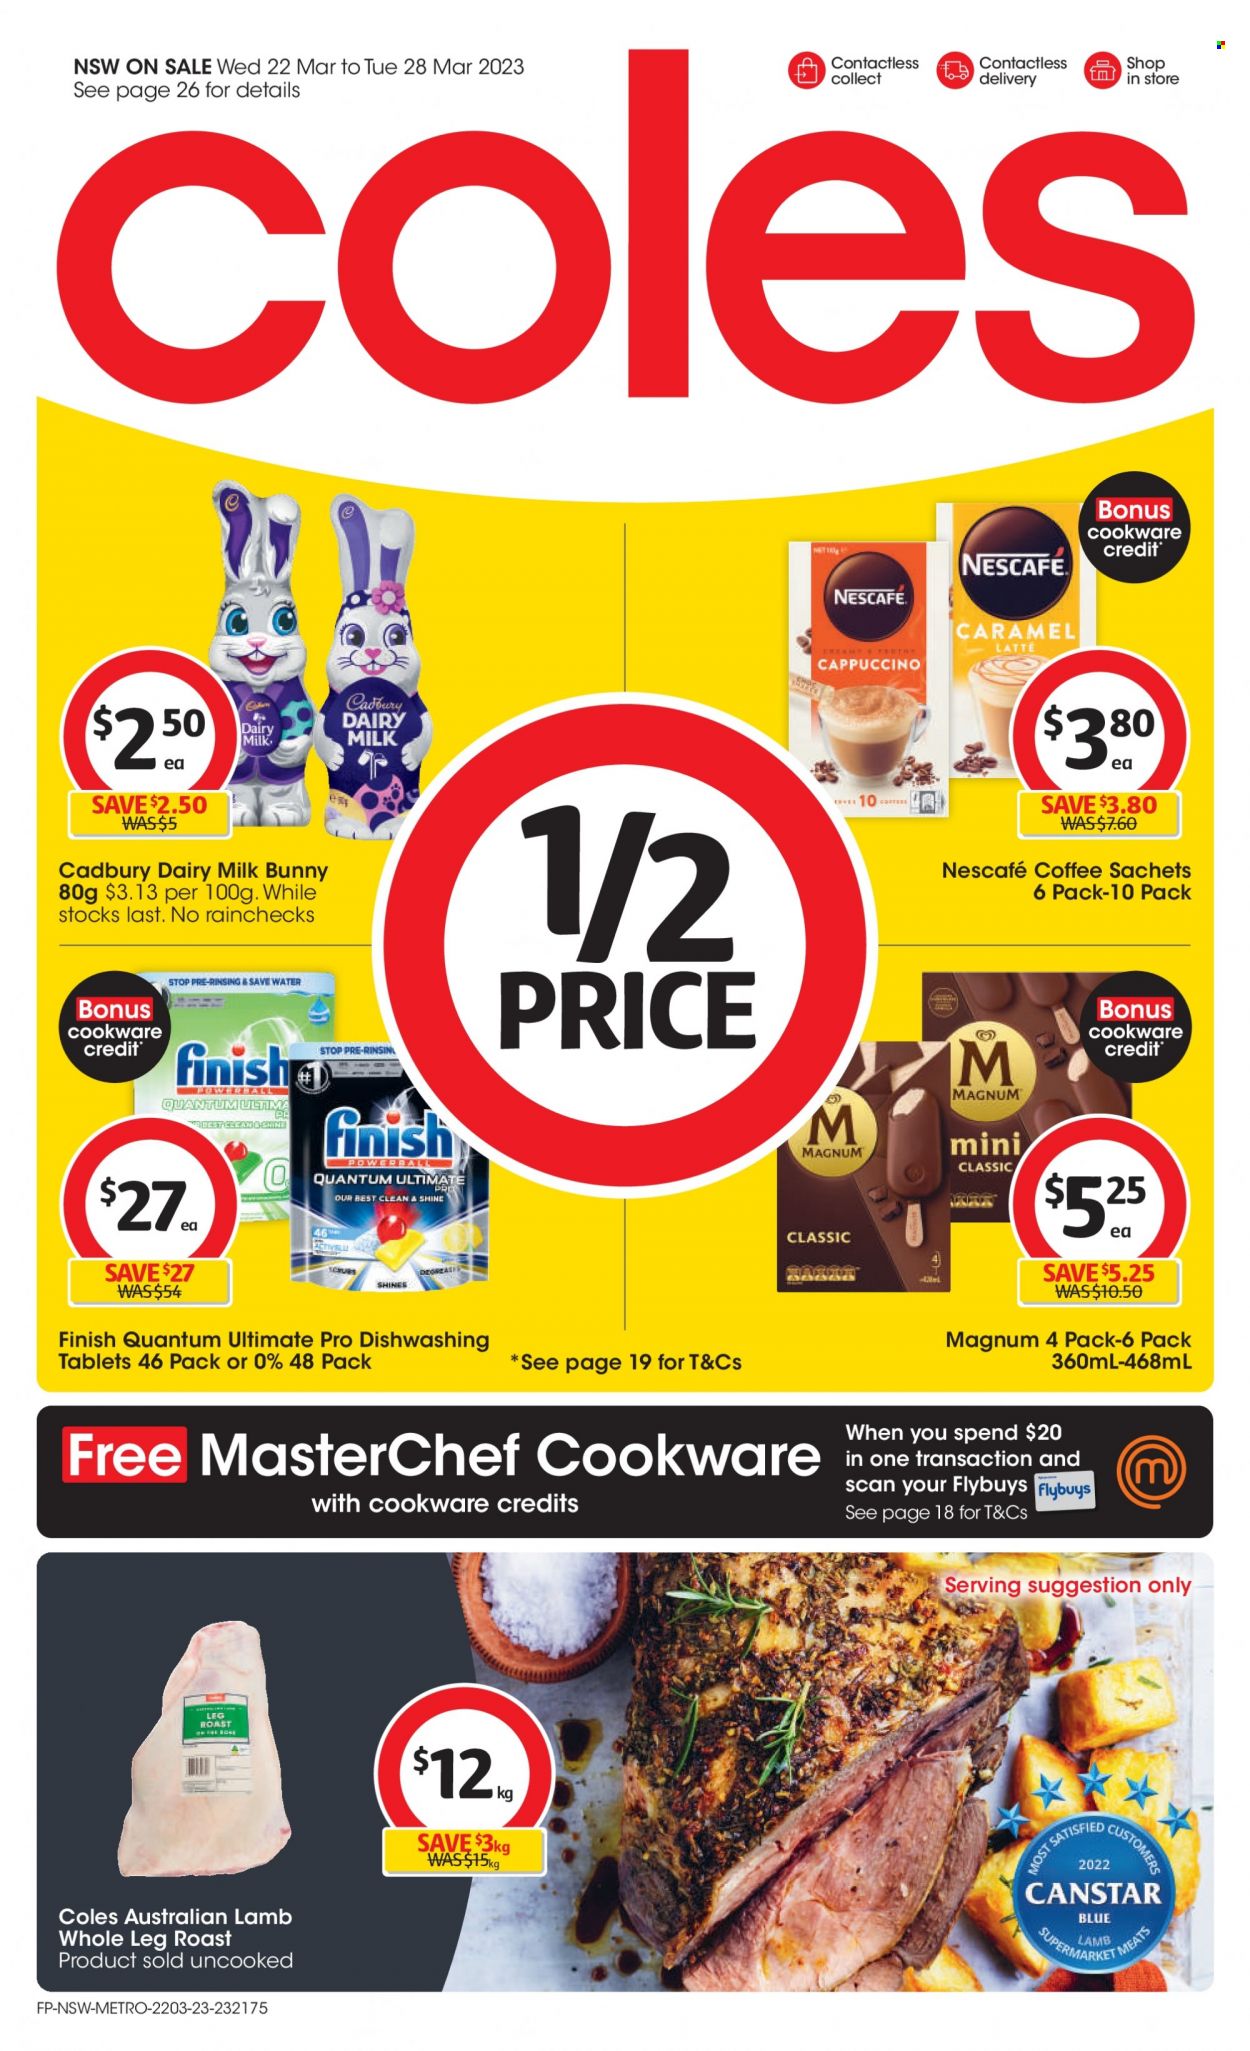 thumbnail - Coles Catalogue - 22 Mar 2023 - 28 Mar 2023 - Sales products - roast, Magnum, Cadbury, Dairy Milk, water, cappuccino, coffee, Nescafé, Finish Powerball, Finish Quantum Ultimate, cookware set, BOSE. Page 1.